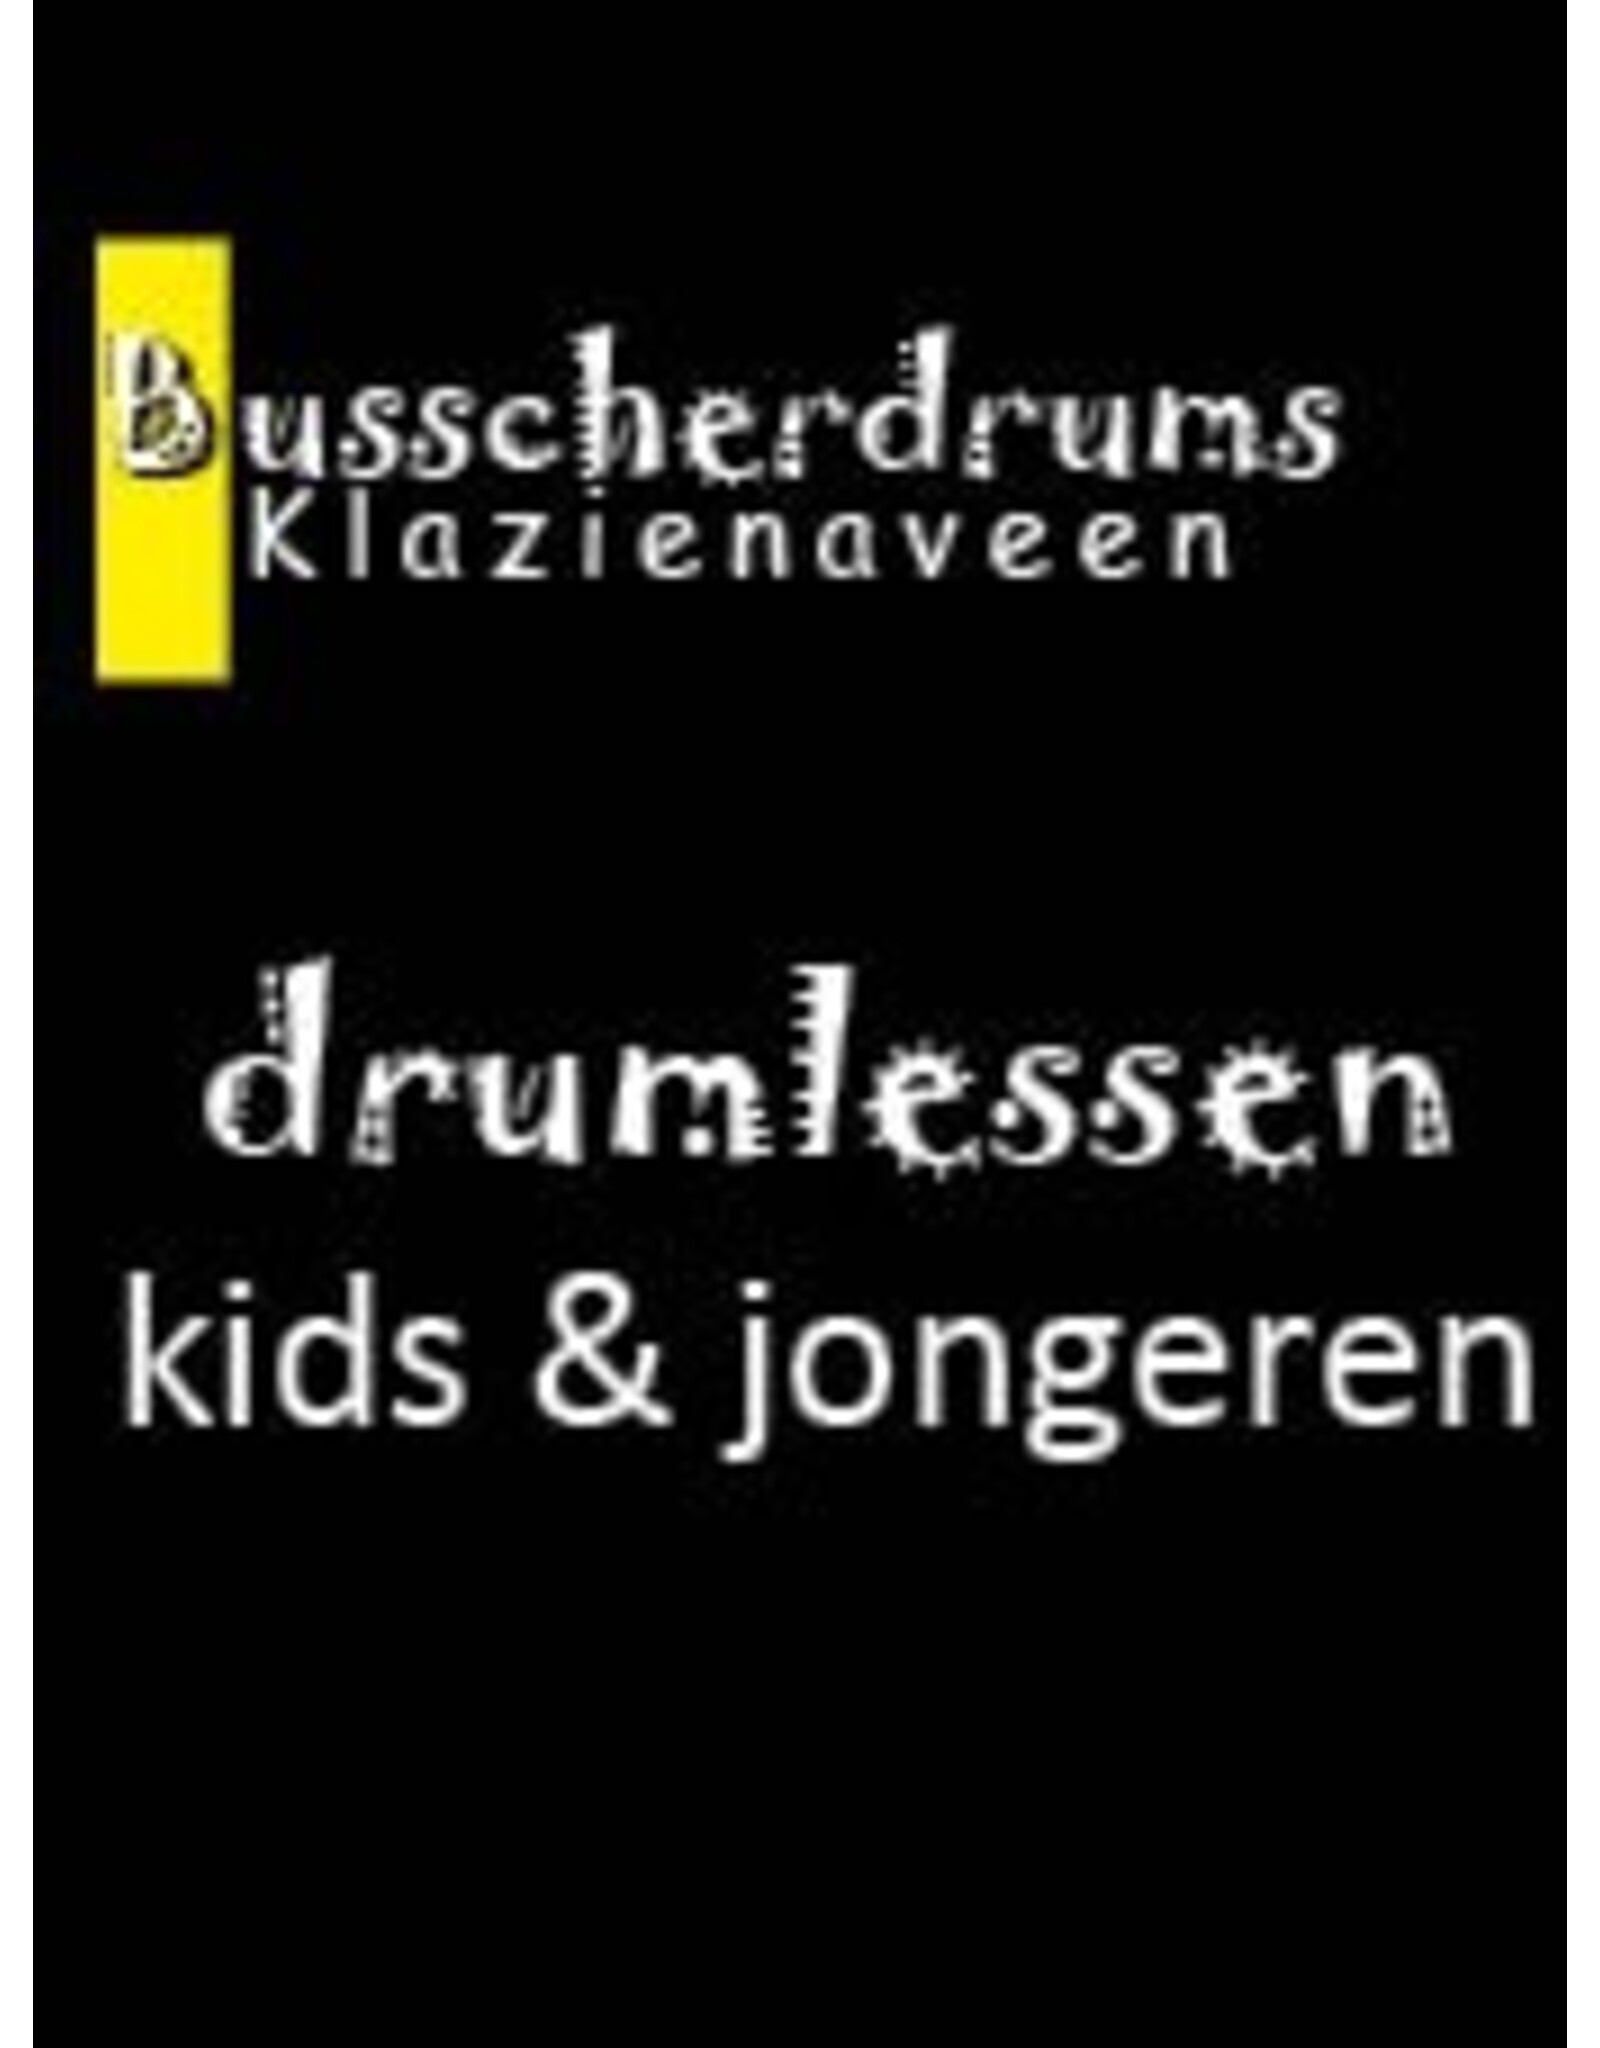 Busscherdrums Drum Lessons monthly card 30 minutes weekly youth 103